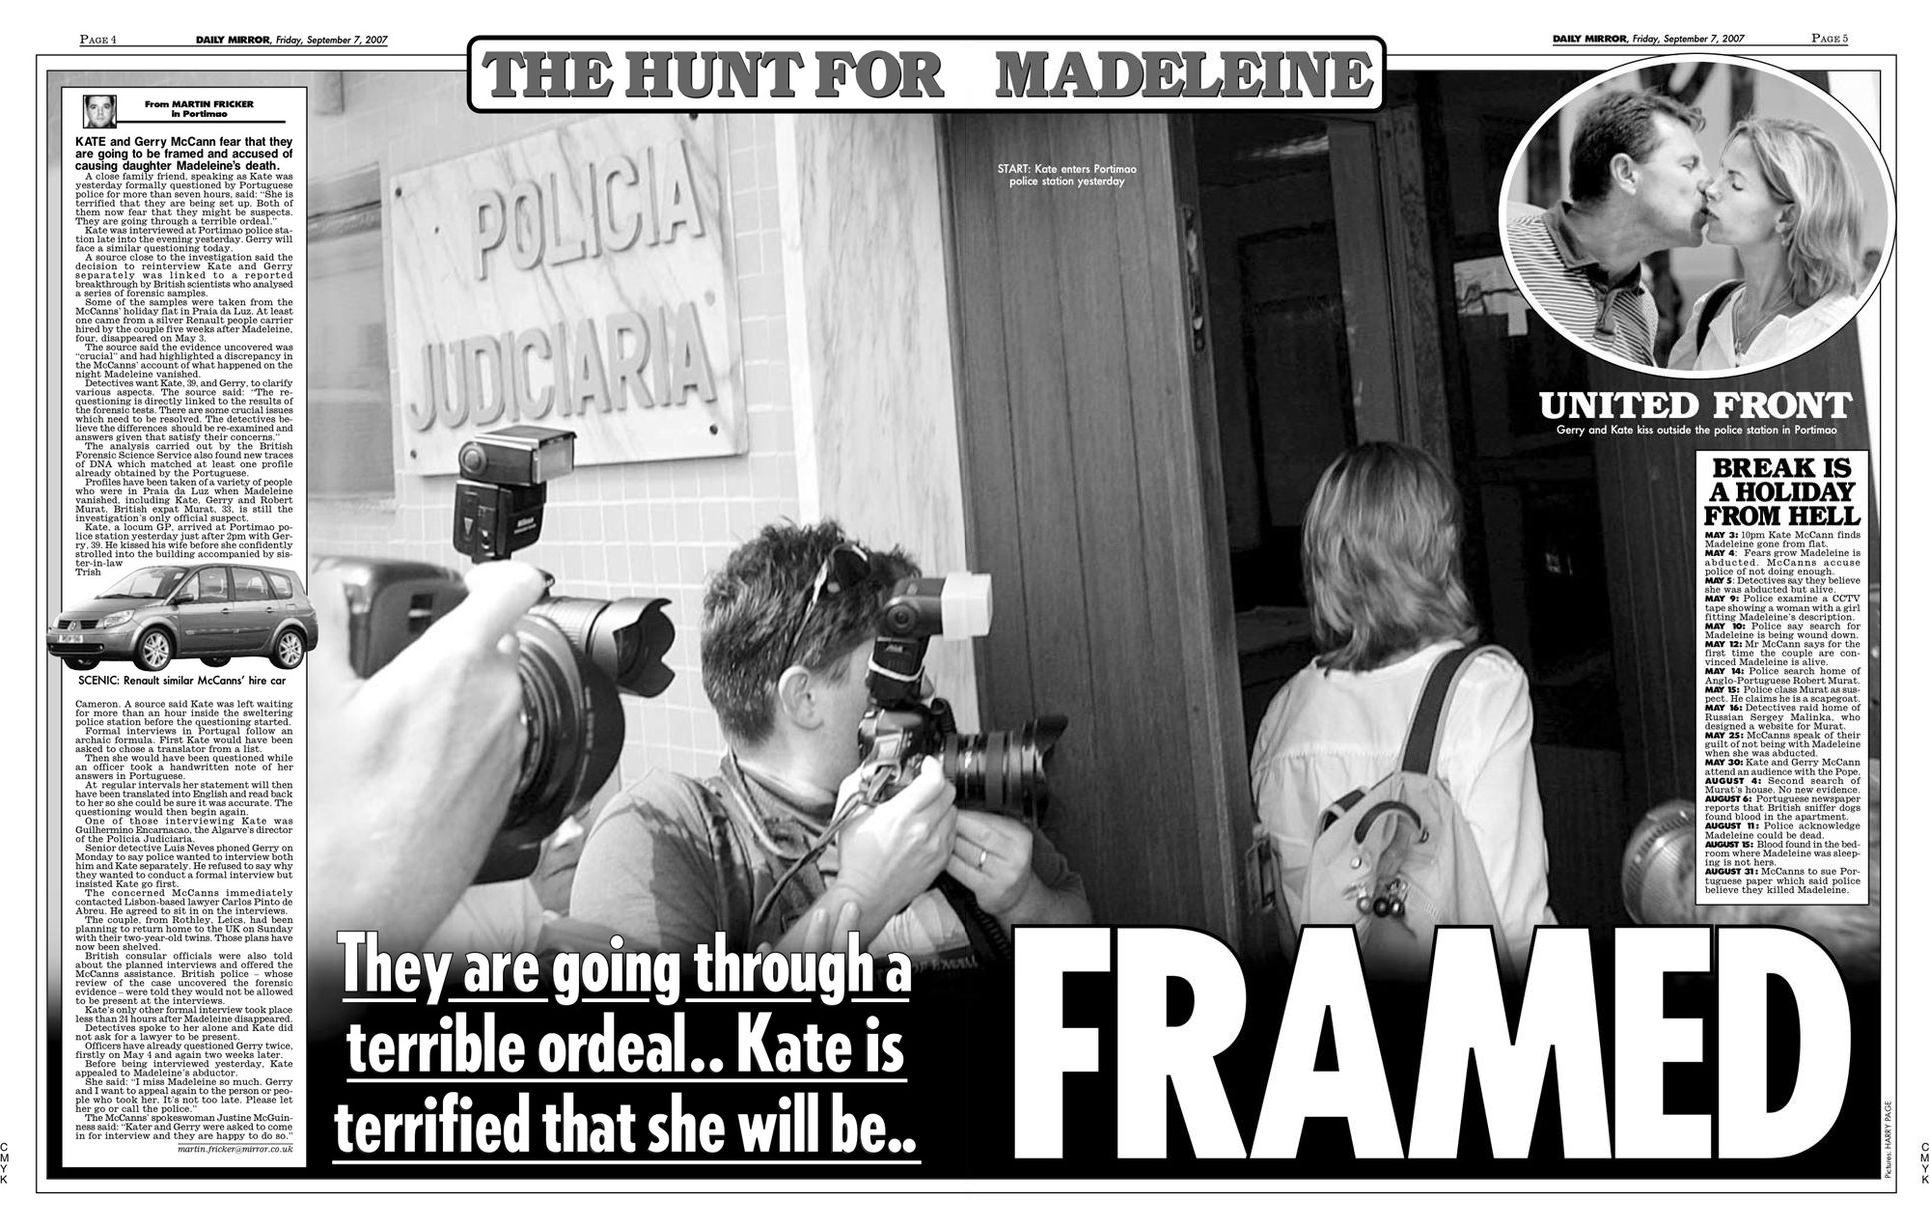 7th September 2007: The couple fear they may be framed over Maddy's disappearance.